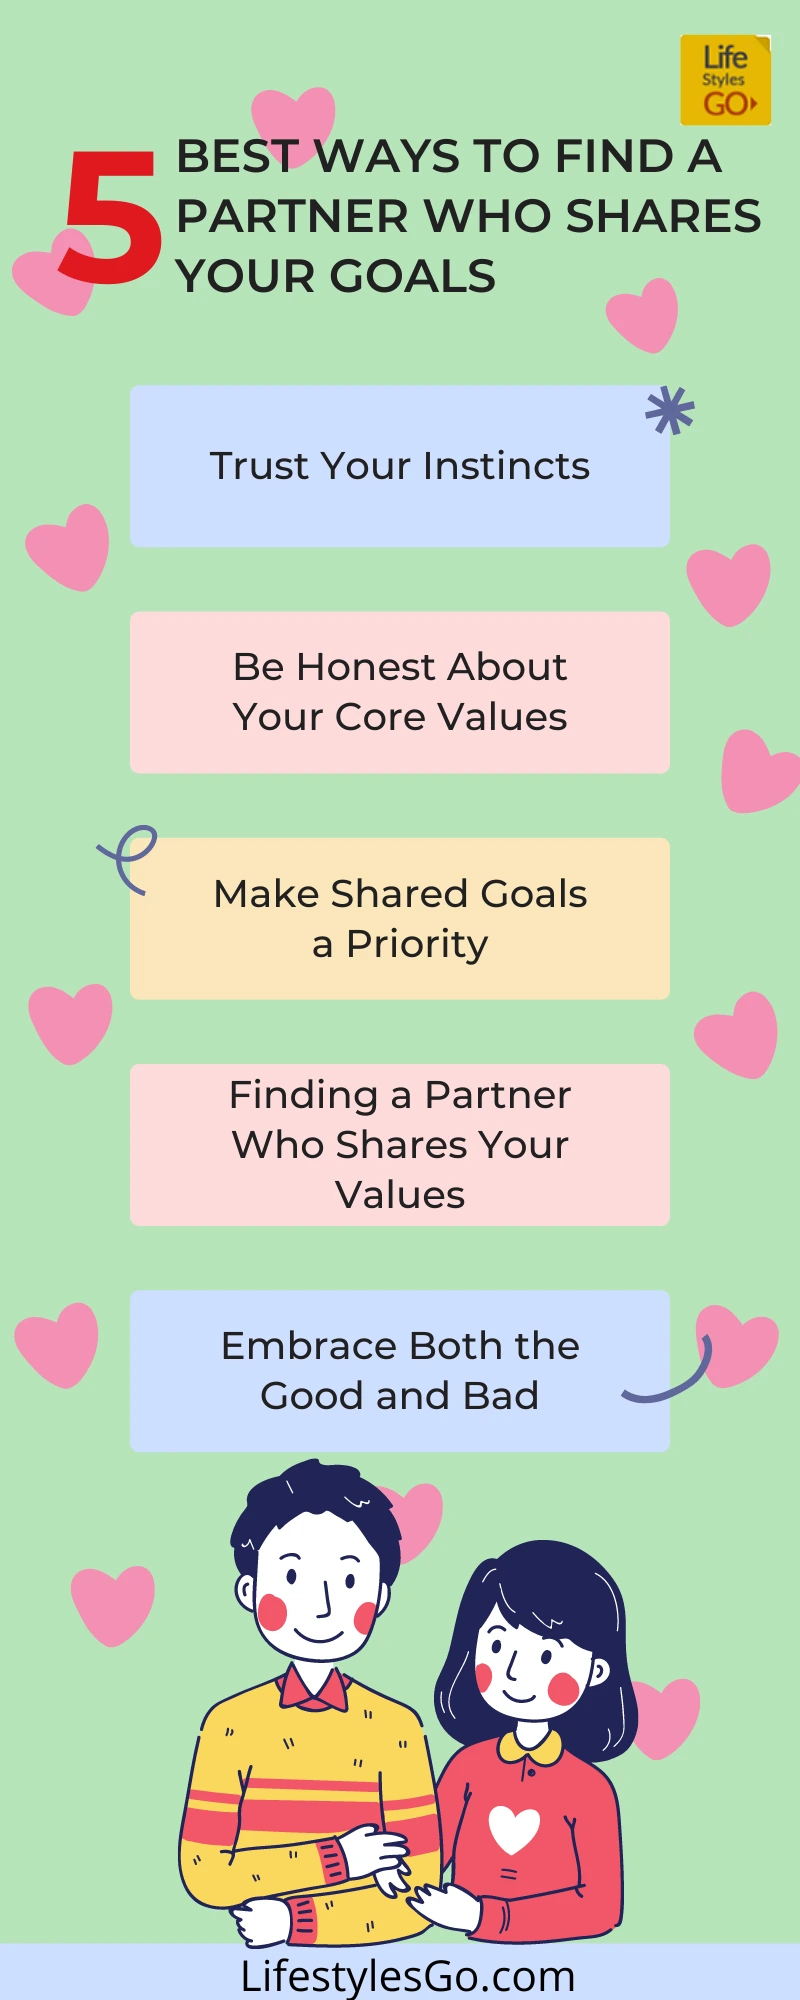 The 5 Best Ways to Find a Partner Who Shares Your goals infographic